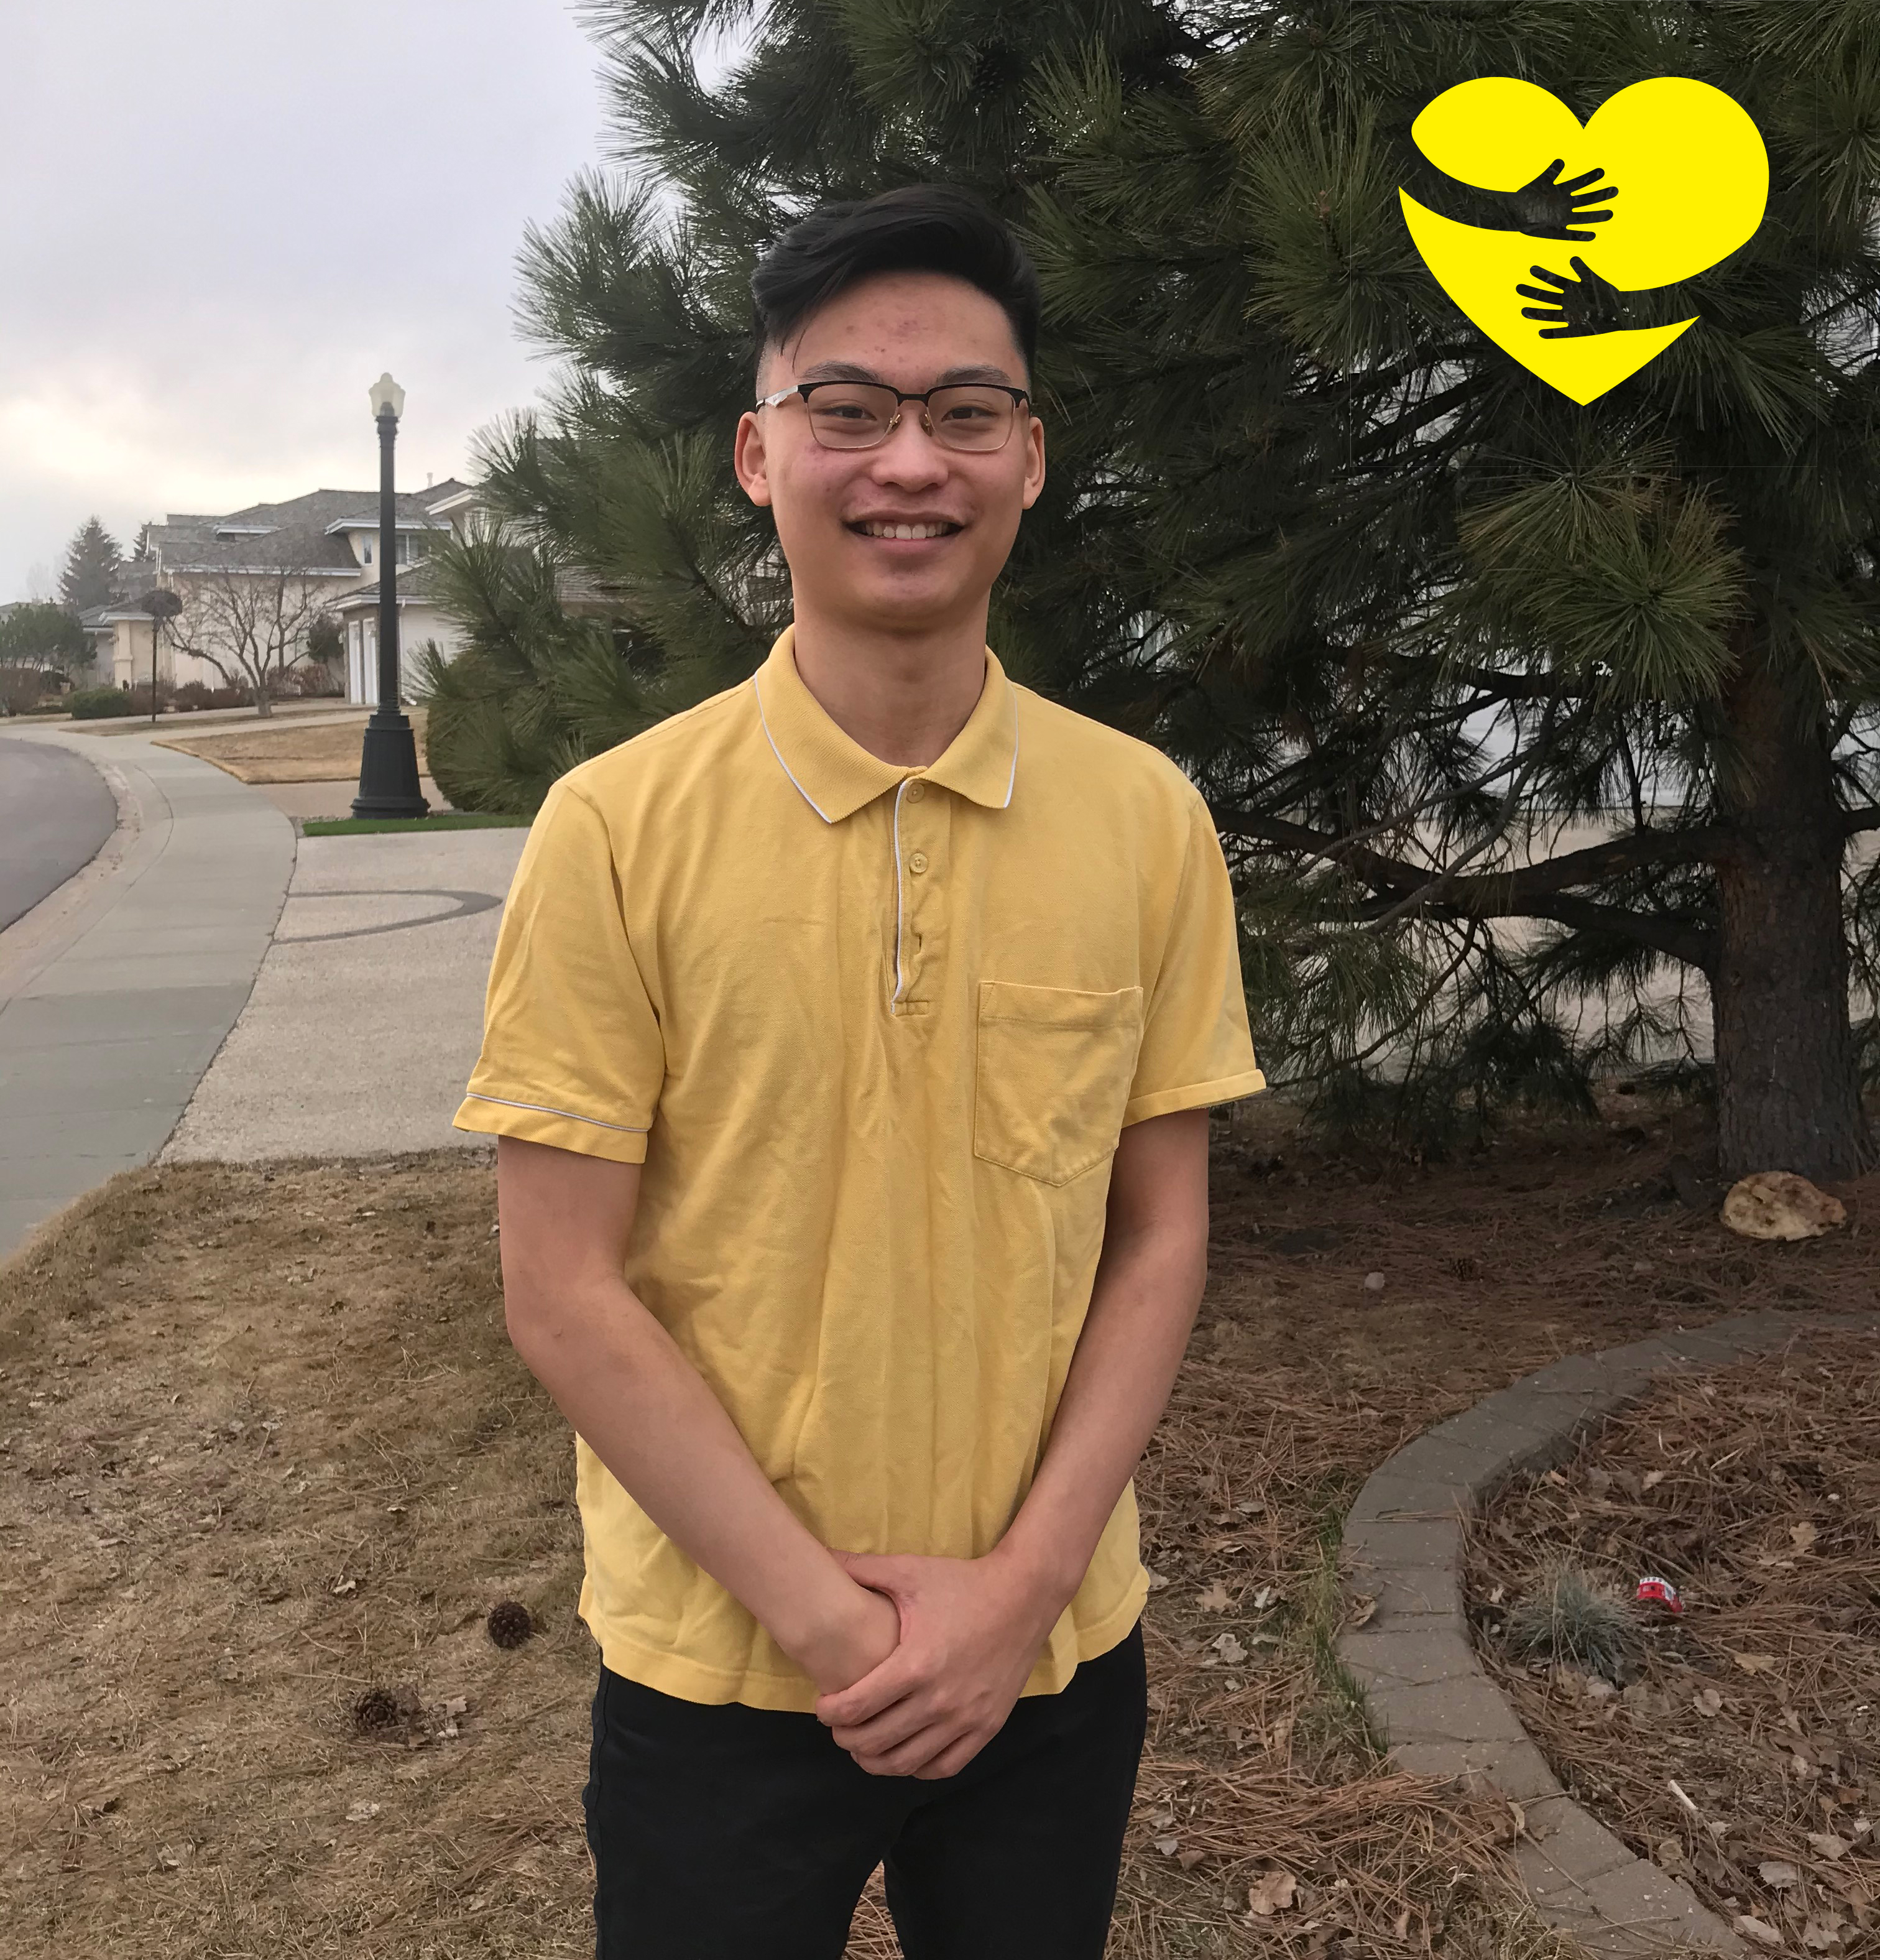 Warren, standing outside wearing a yellow shirt, smiling for the camera. A graphic of arms hugging a yellow cartoon heart can be seen in the top-right corner of the photo.